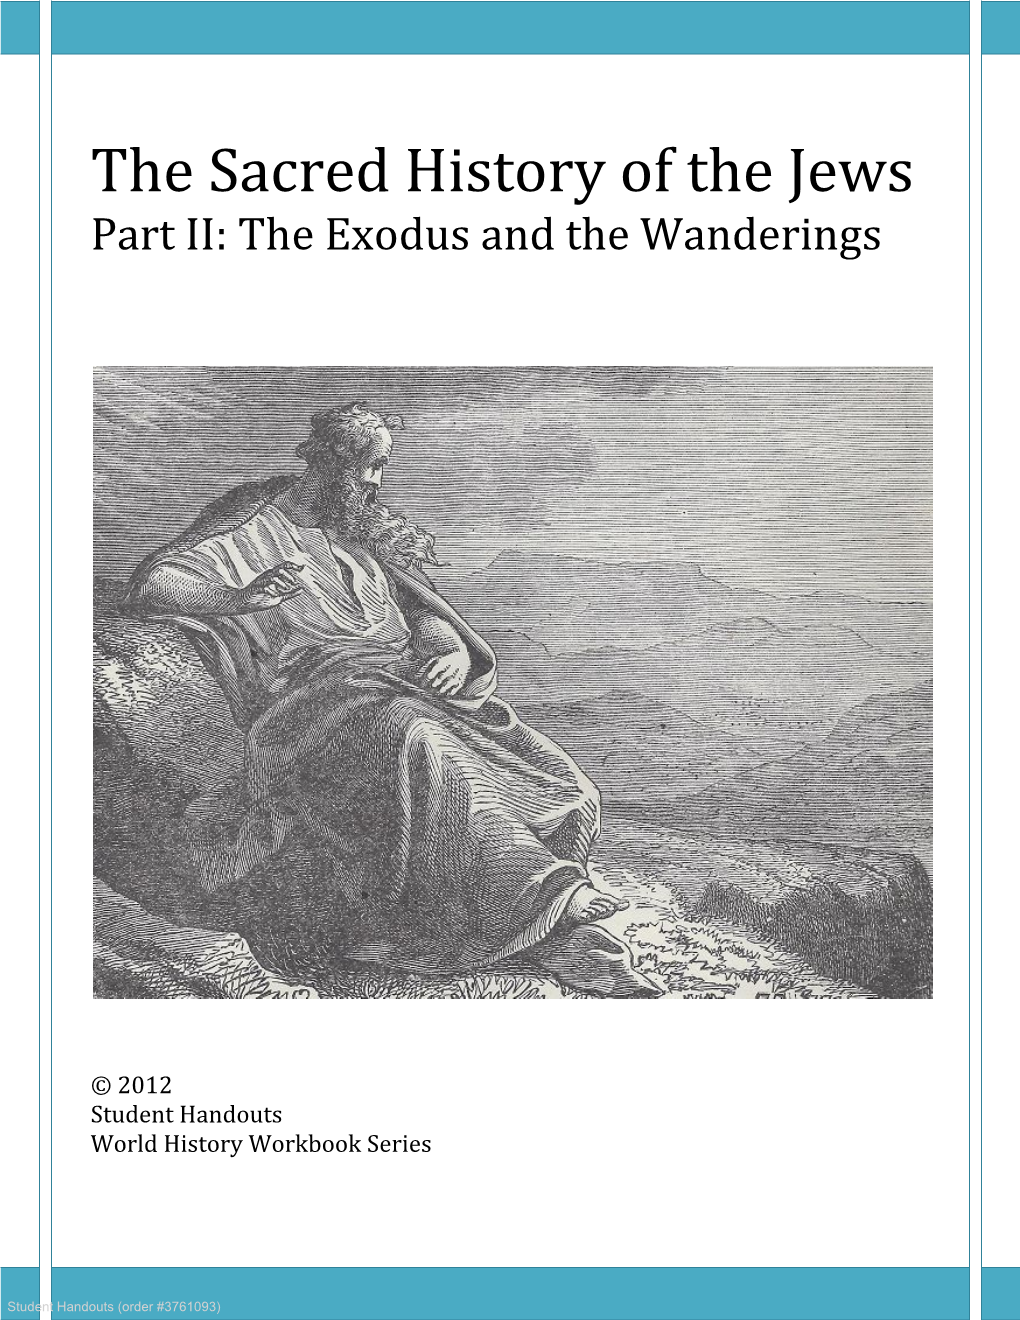 The Sacred History of the Jews Part II: the Exodus and the Wanderings